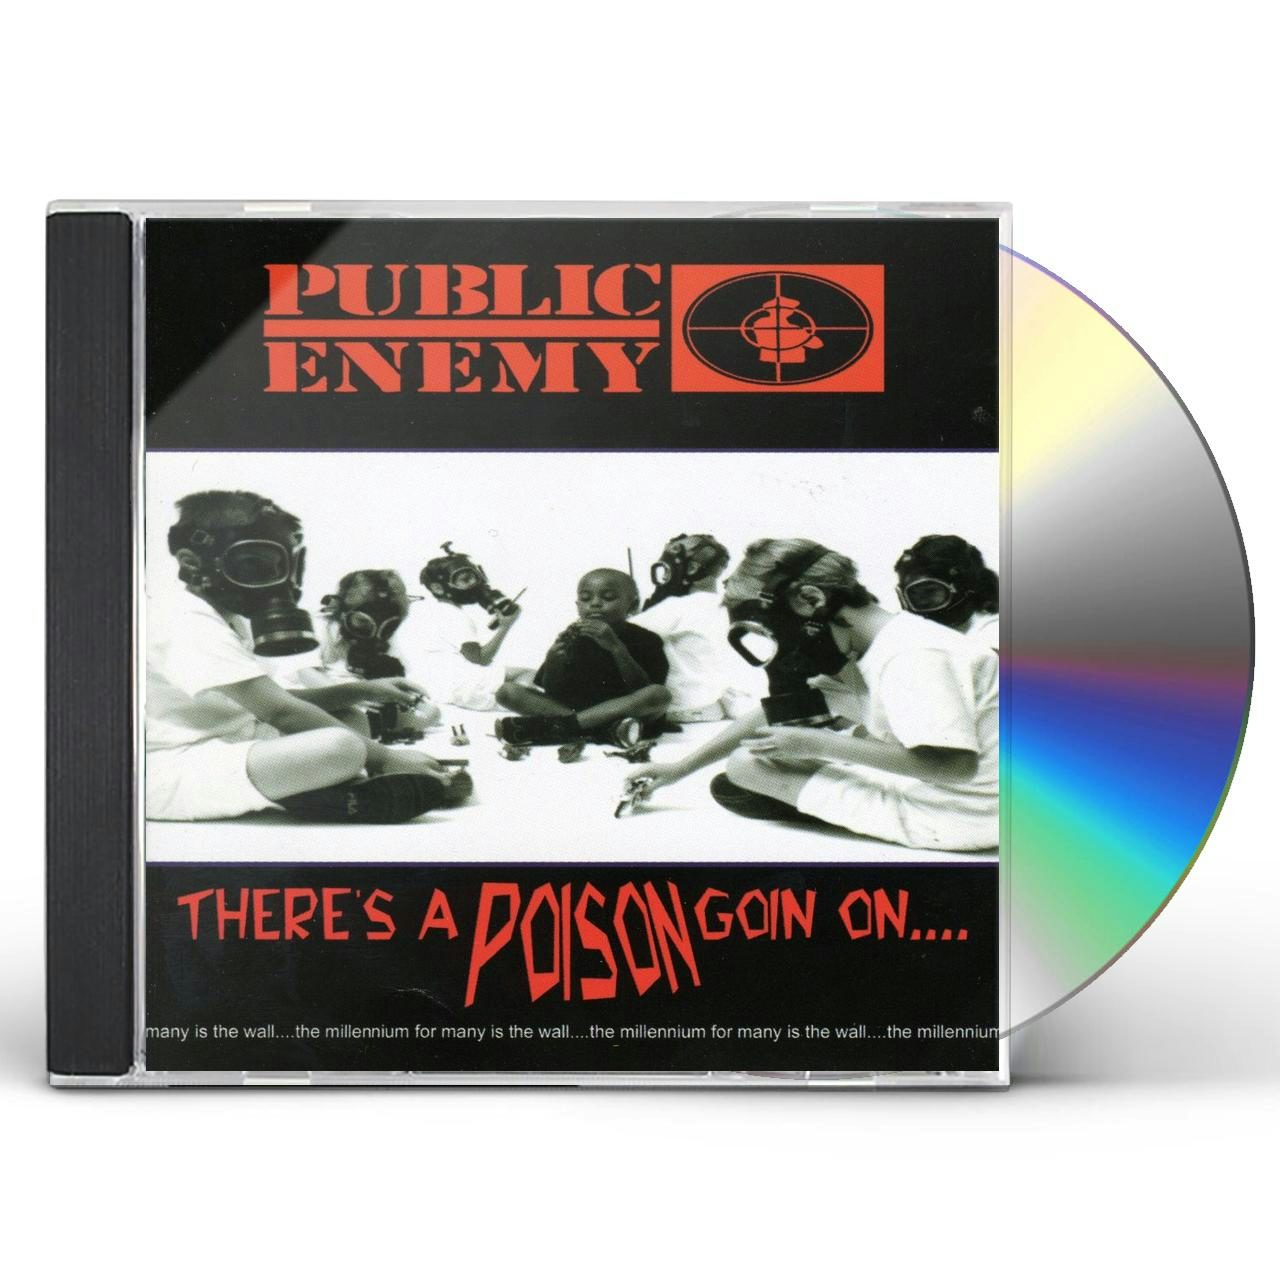 HOTお買い得Public Enemy - There\'s A Poison Goin On. 洋楽